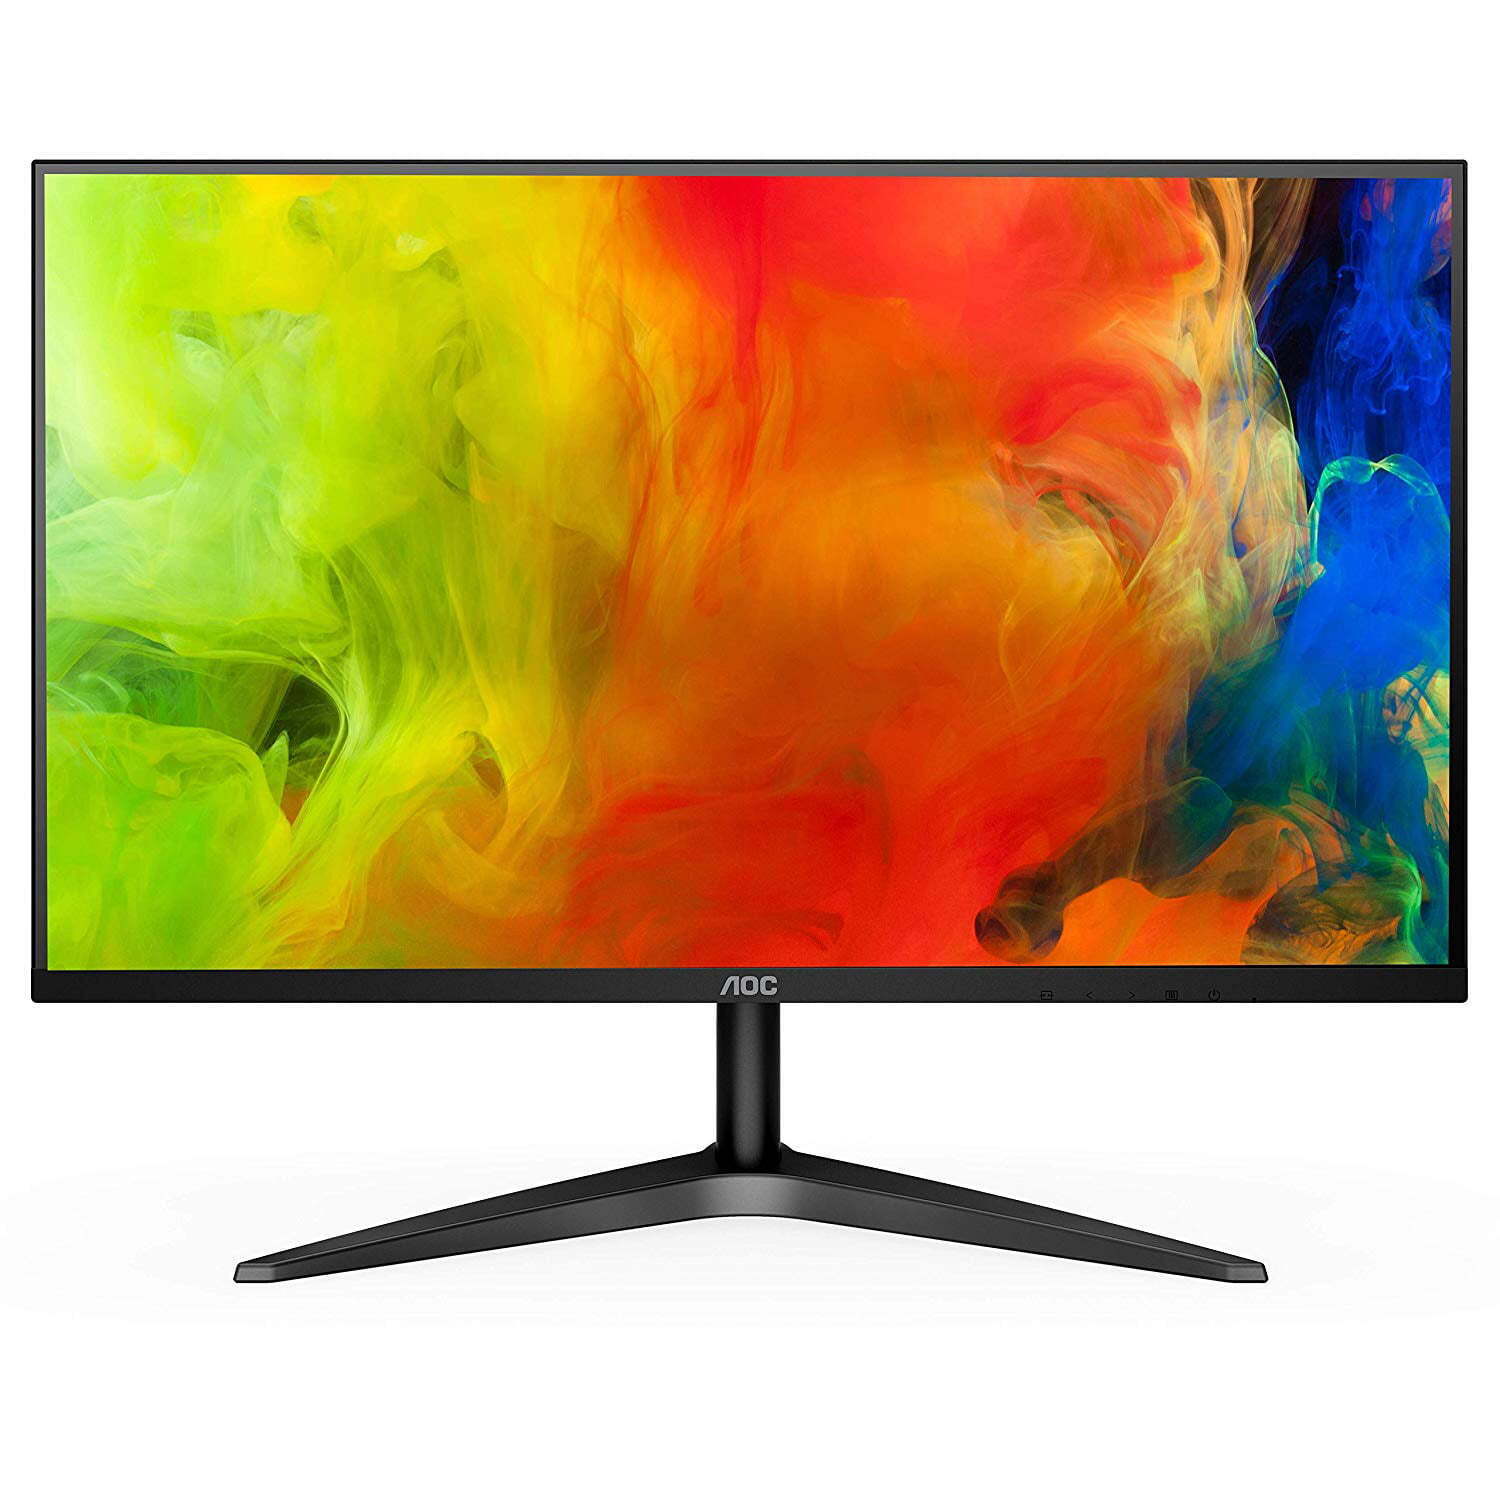 AOC 27B1H 27 inches 1080p LCD IPS Monitor - Missing HDMI Cable